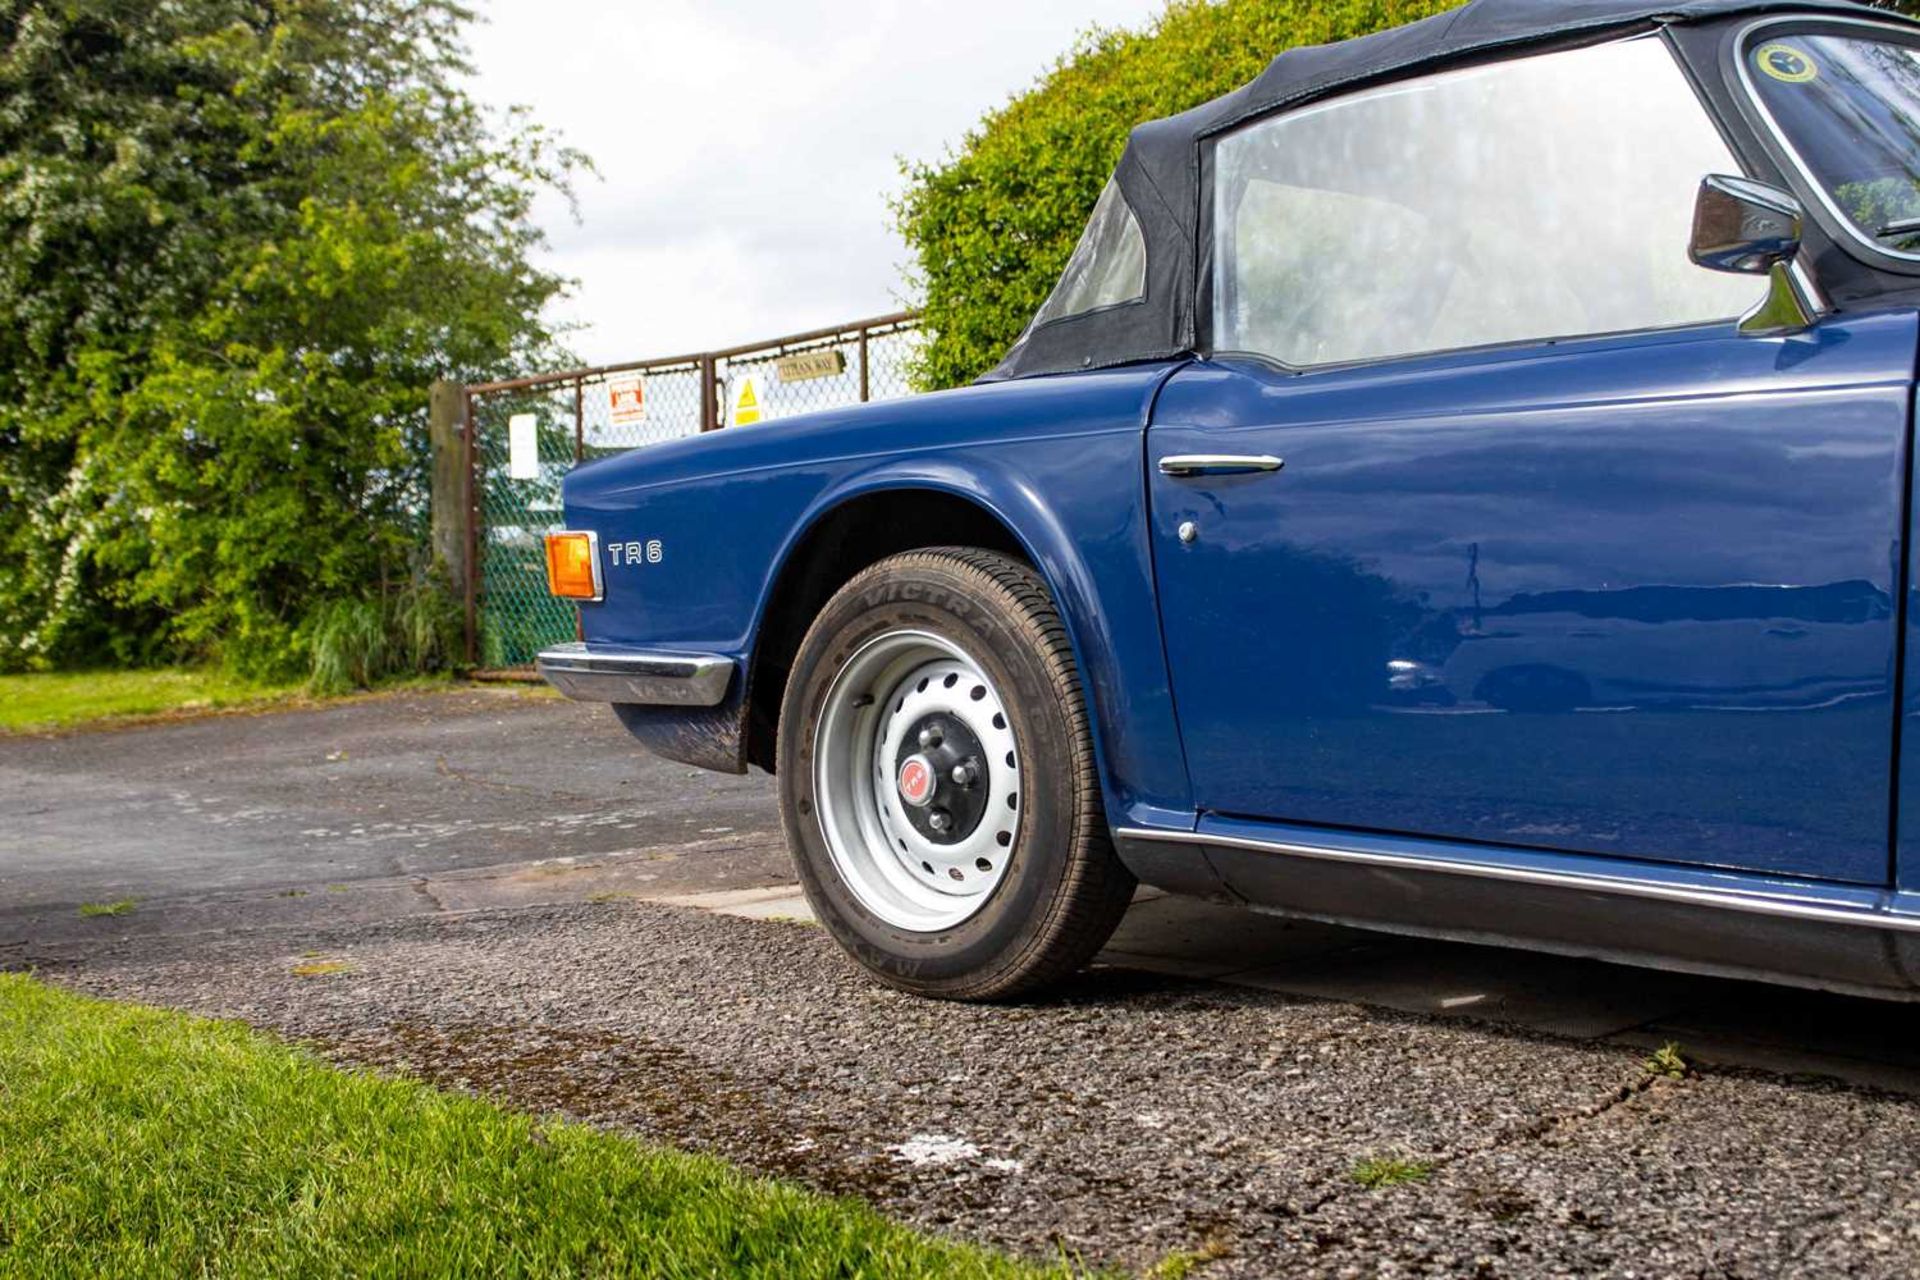 1972 Triumph TR6 Home market example, specified with manual overdrive transmission - Image 44 of 95